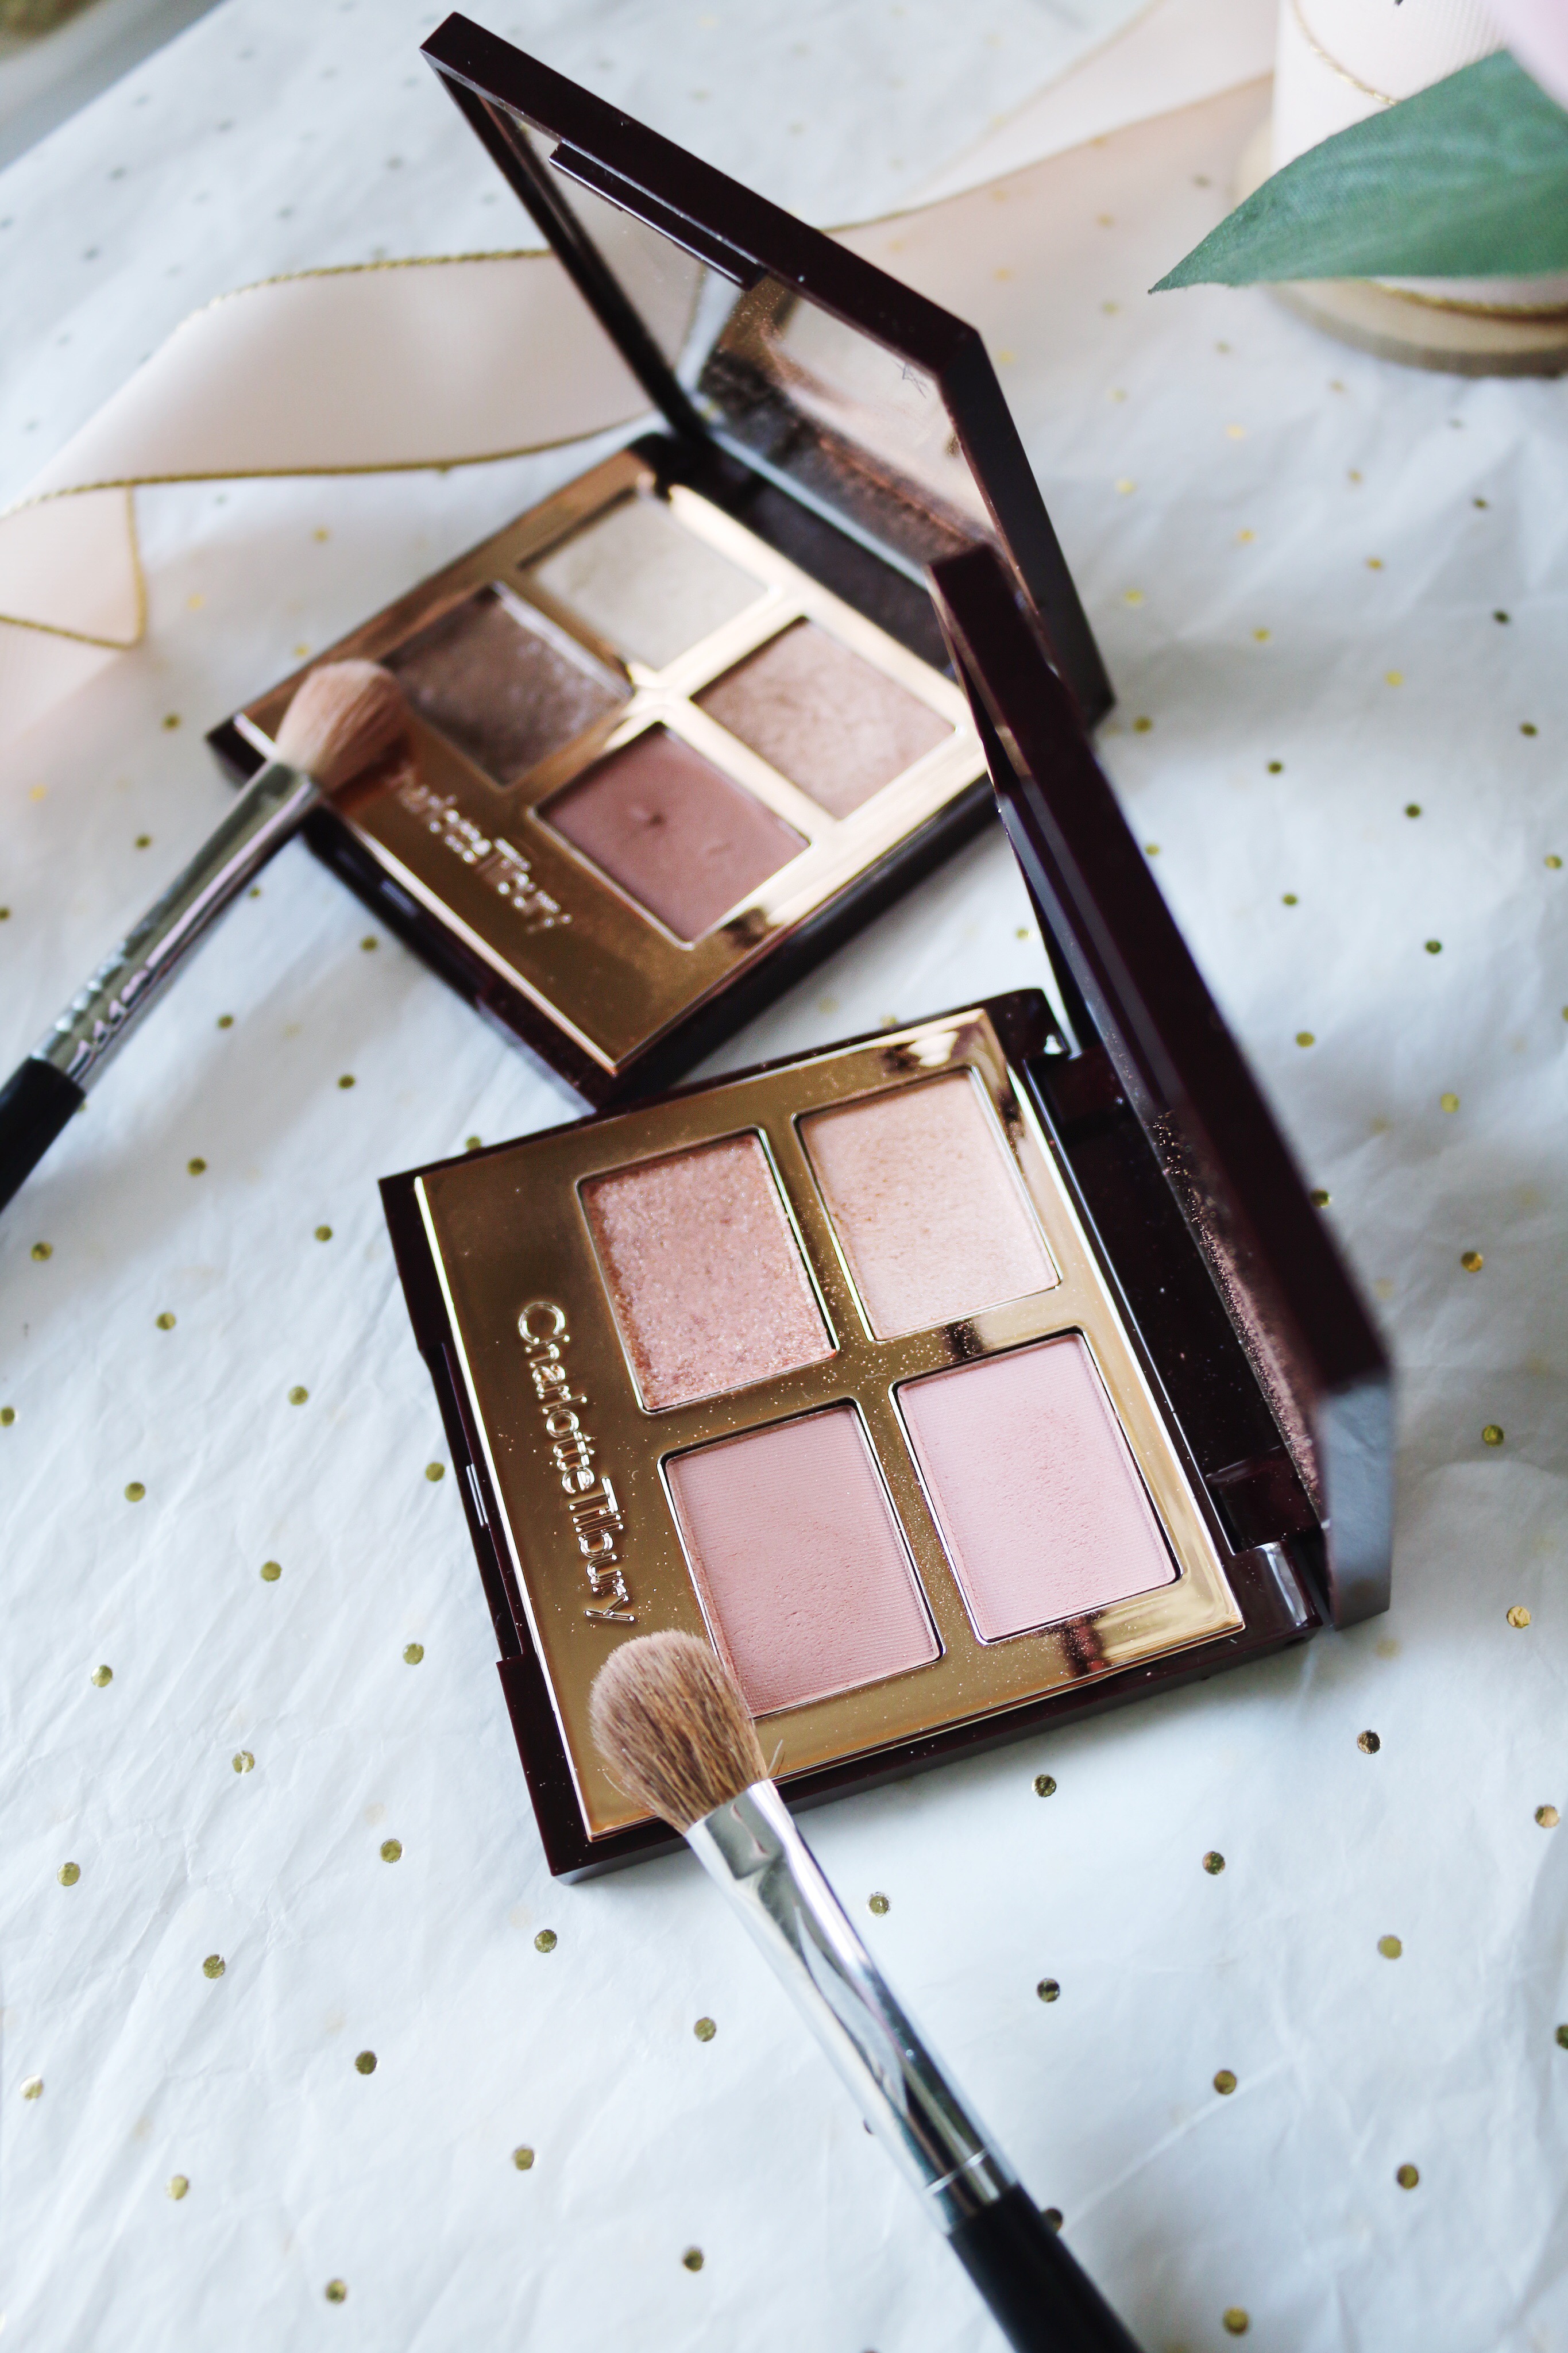 Charlotte Tilbury Exagger-Eyes & Pillow Talk Eyeshadow Palettes Reviewed by top DC beauty blogger, The Beauty Minimalist